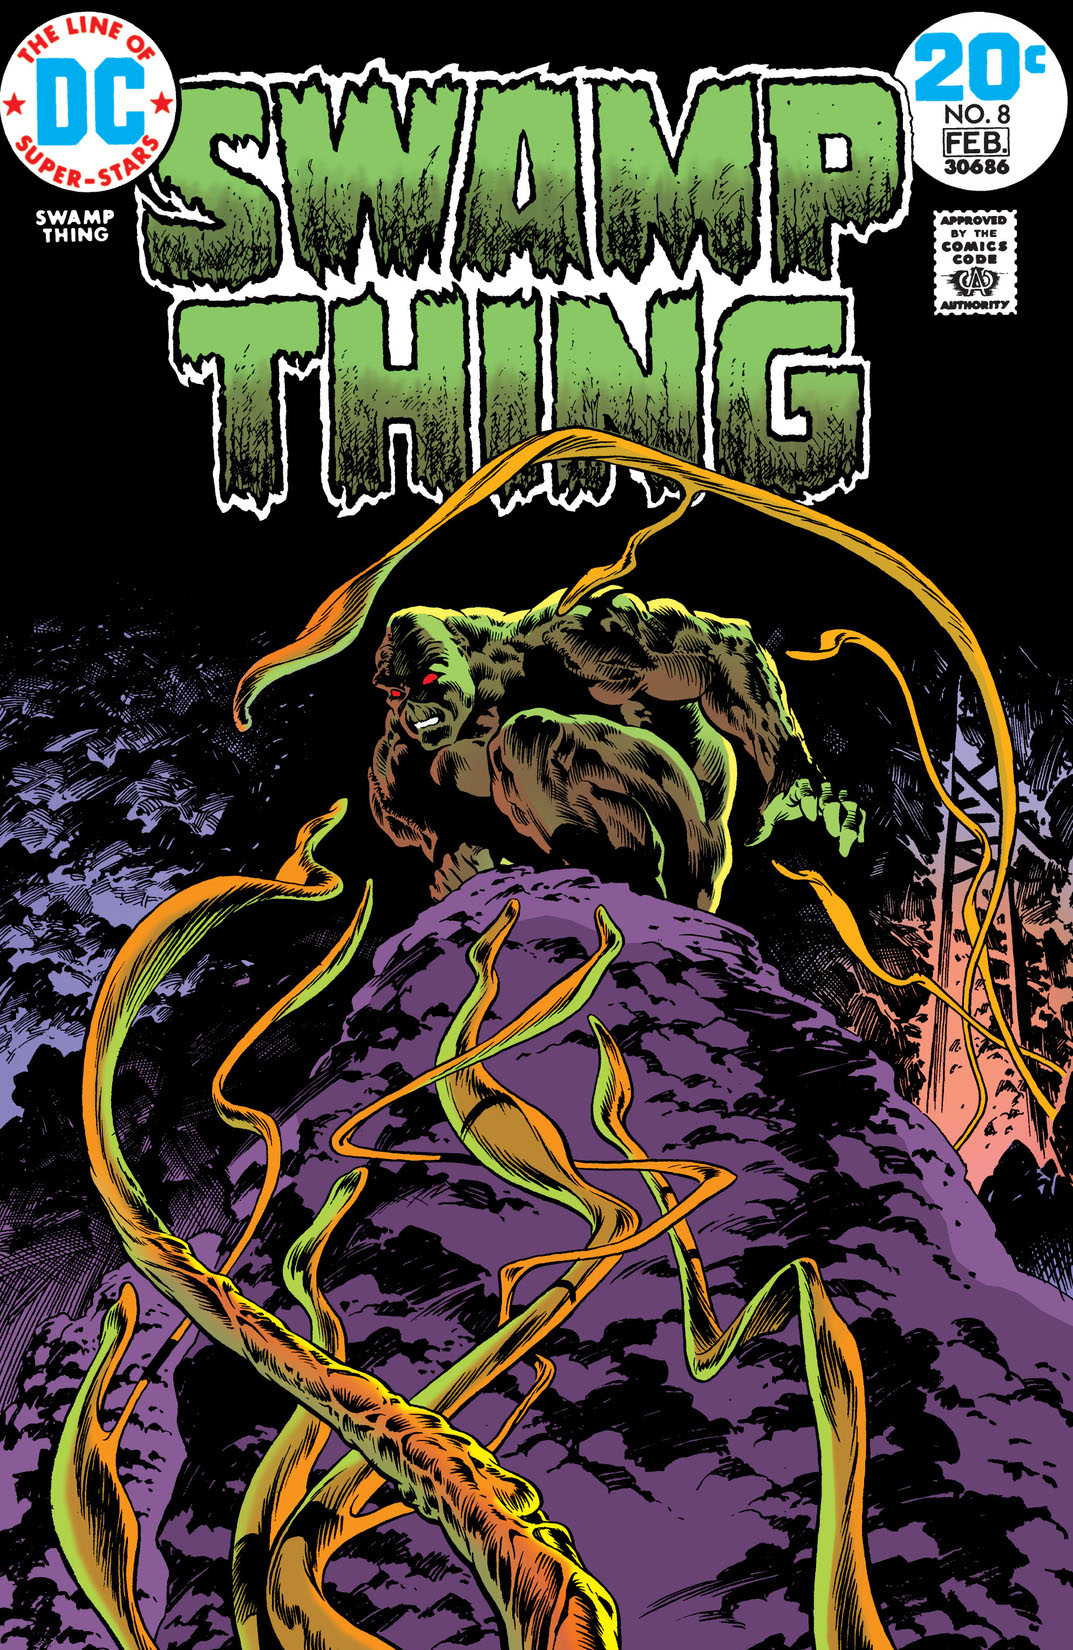 Swamp Thing (1972-) #8 preview images